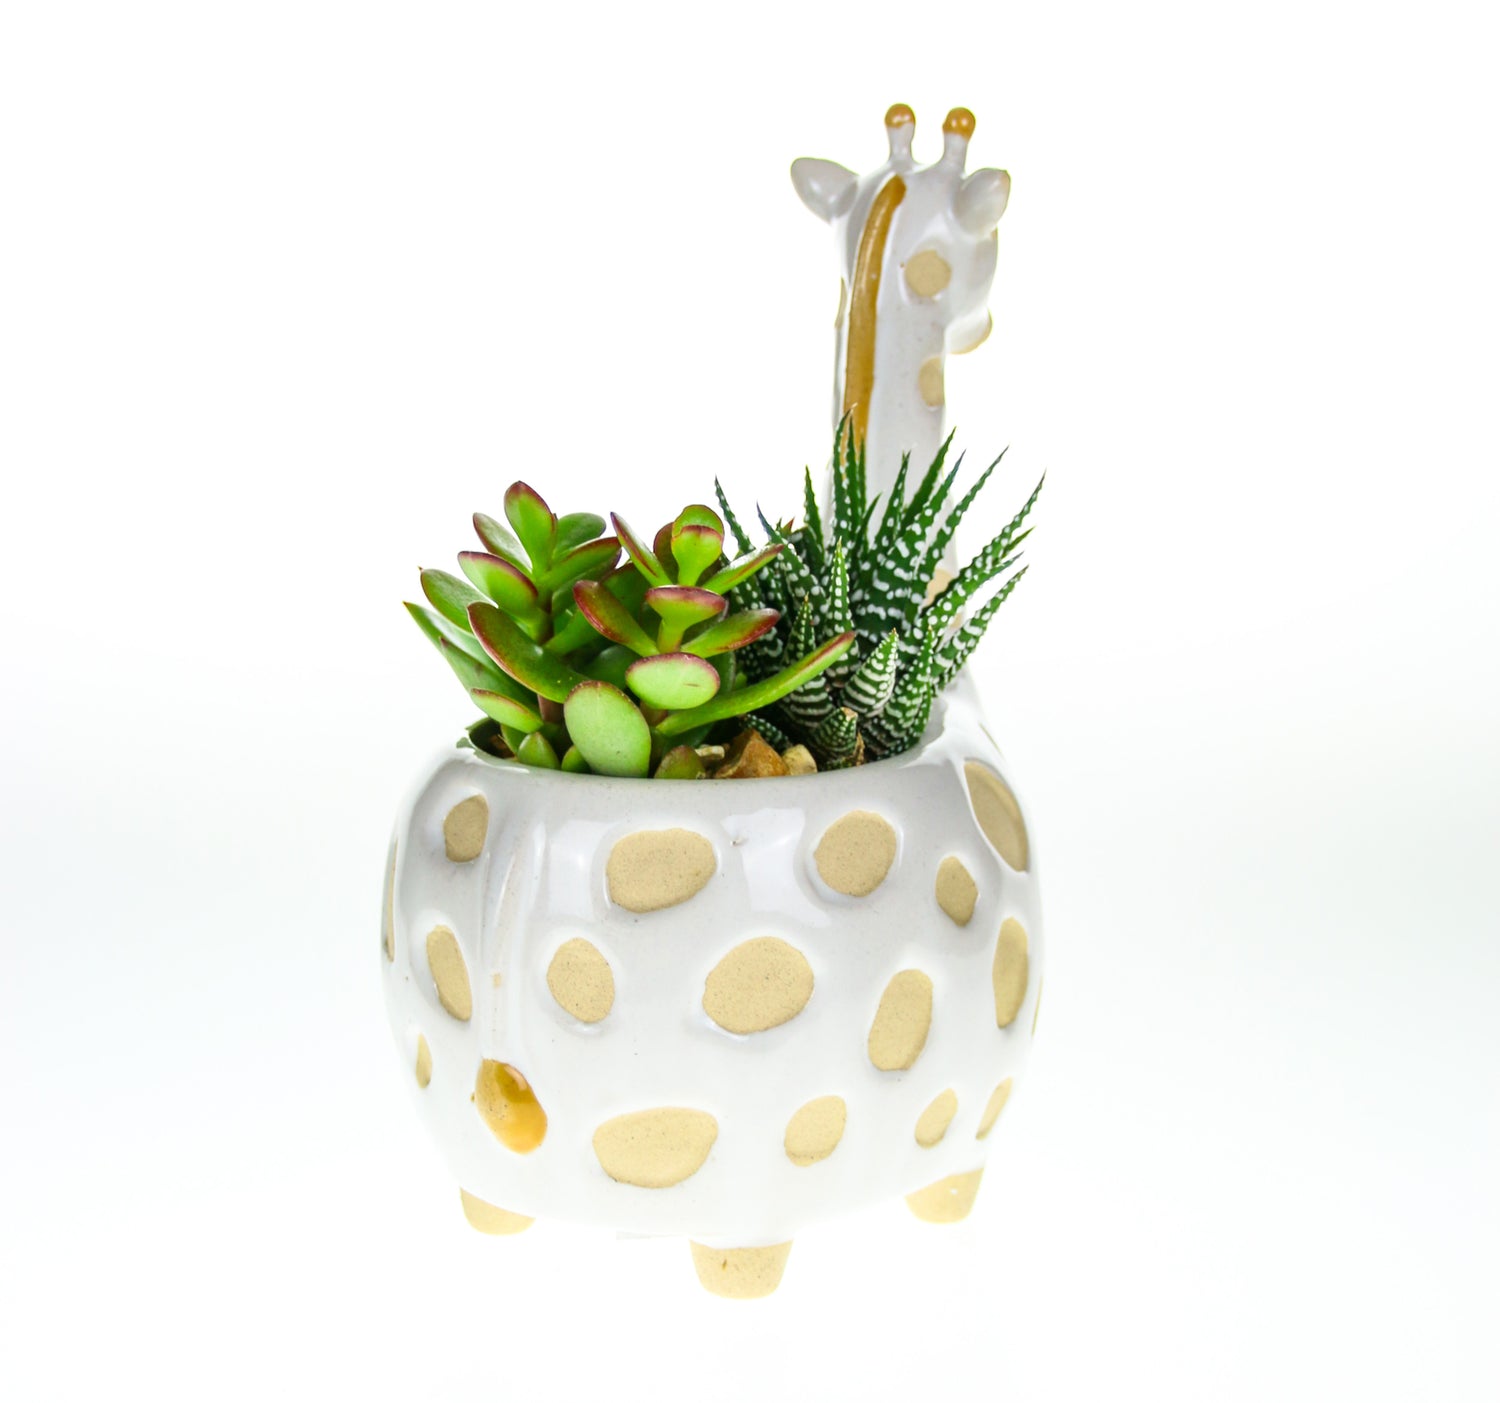 Order planter with plants kit